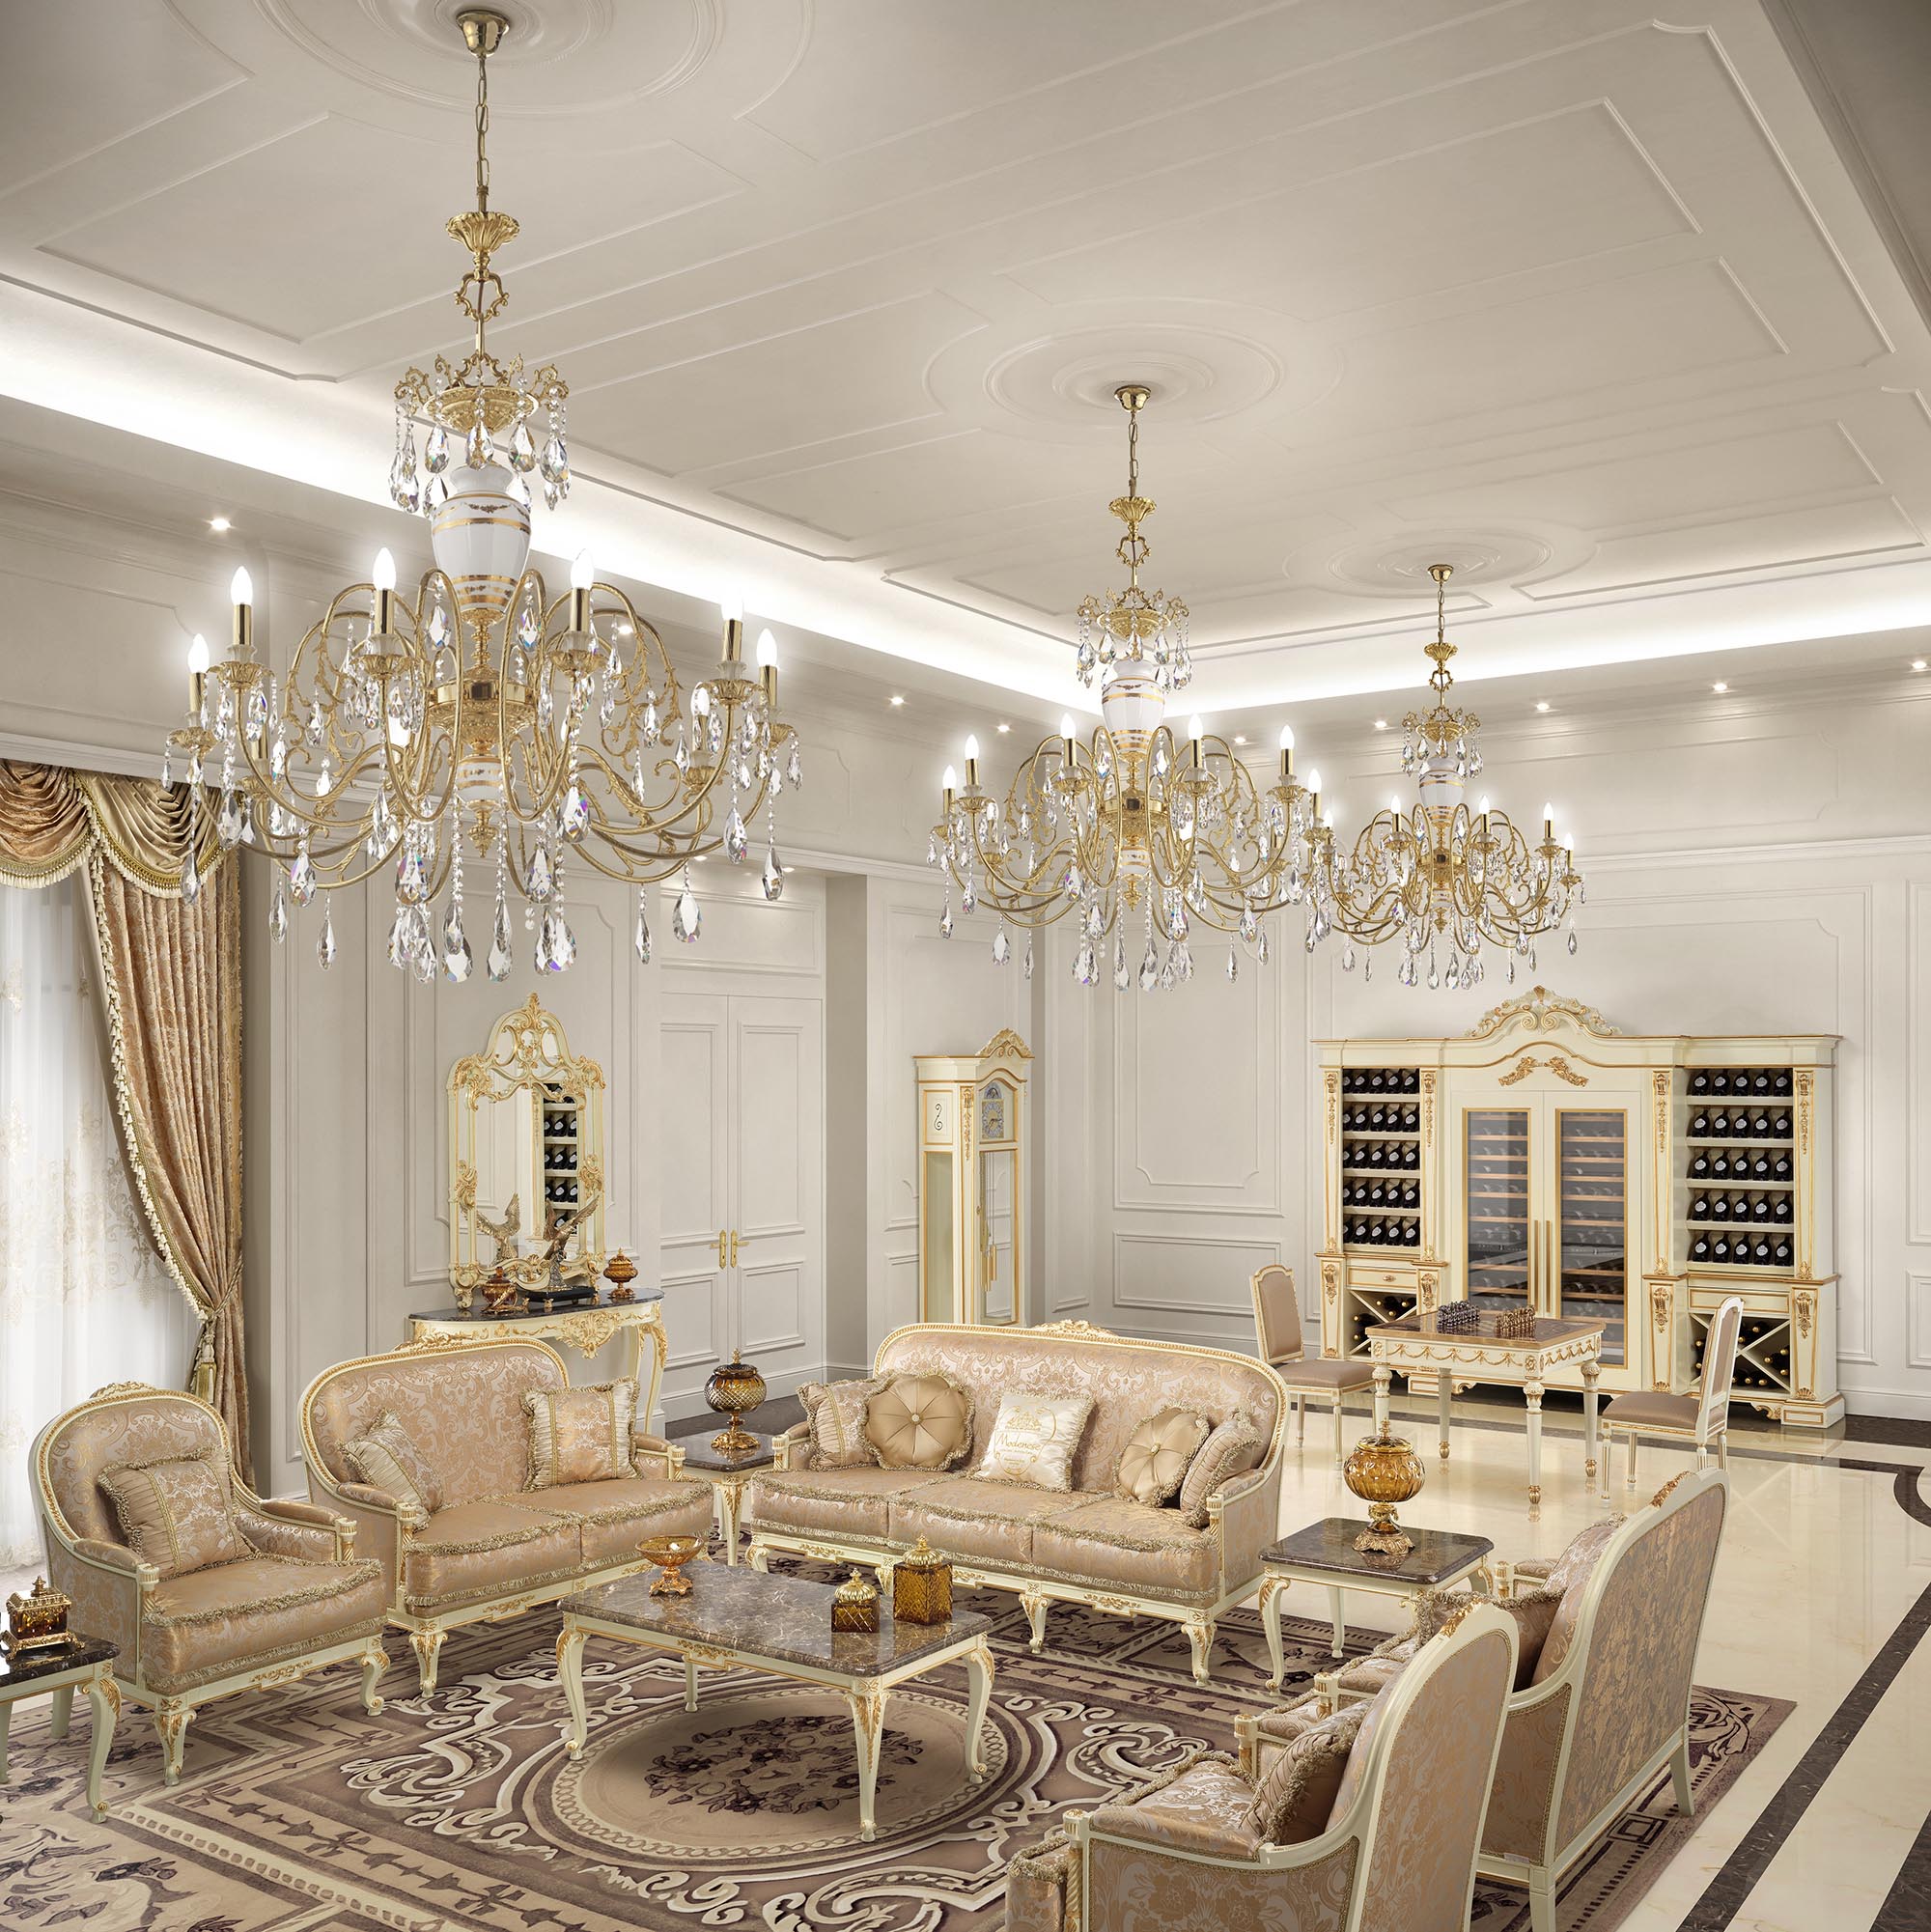 Exquisite Crystal Chandeliers: Shimmer and Shine at Home